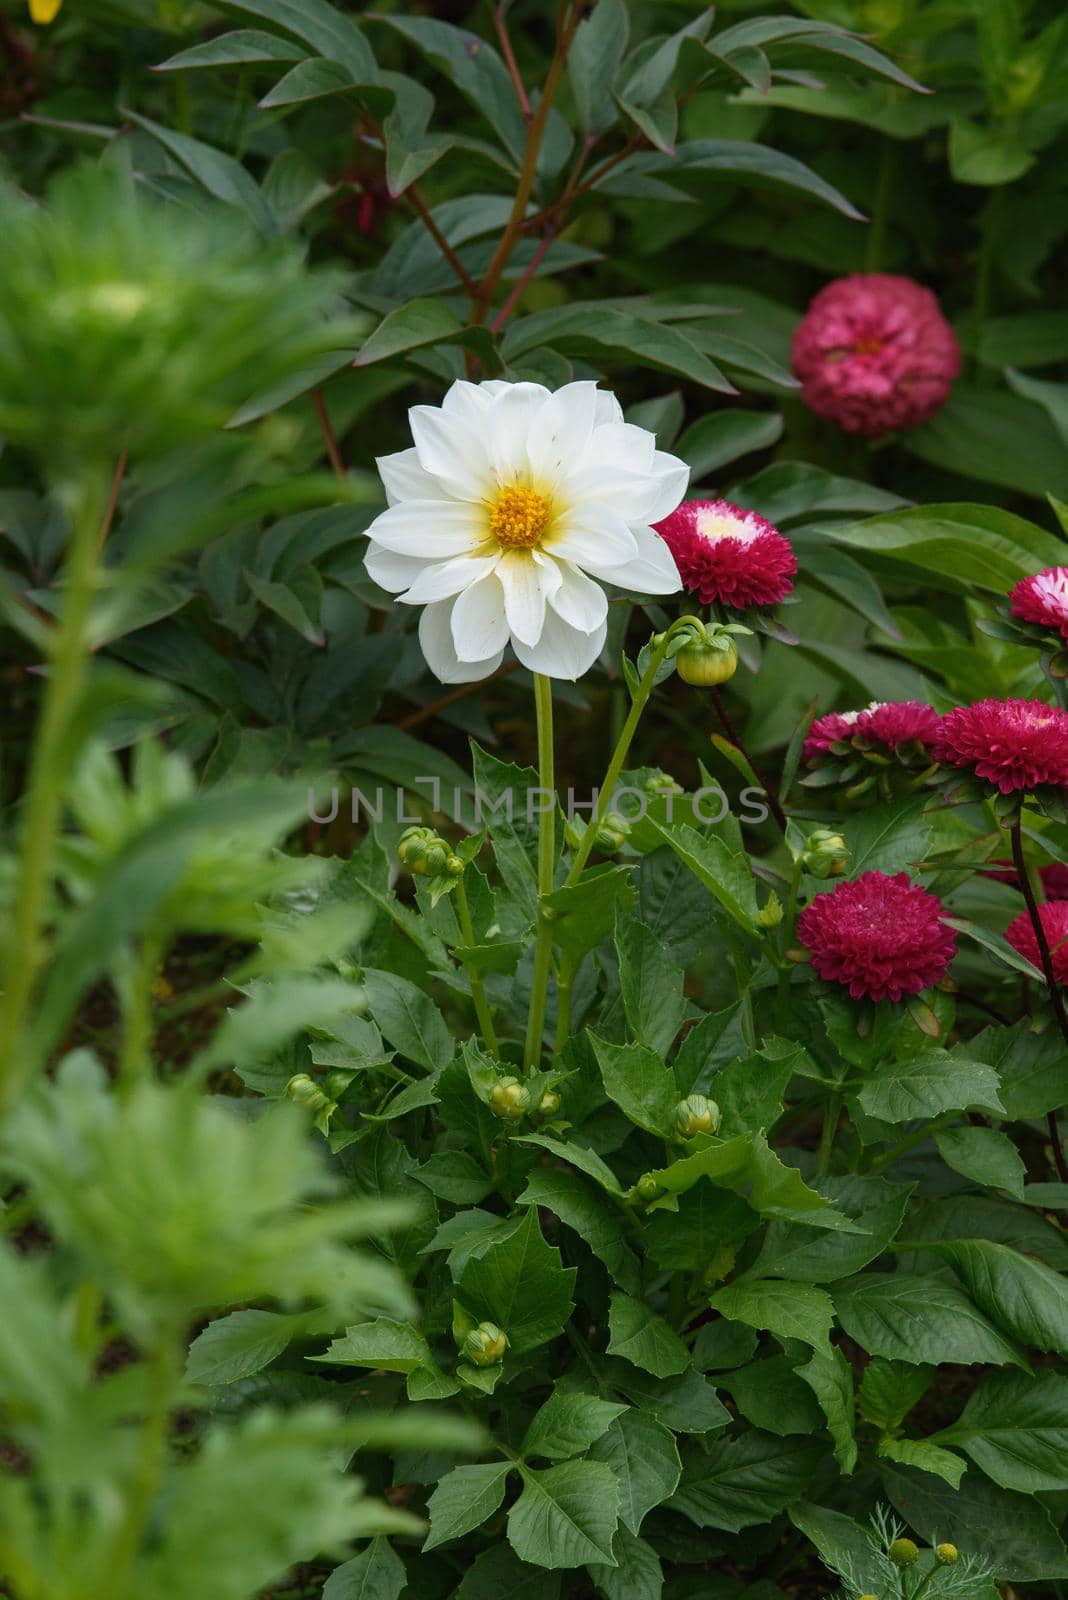 A dahlia flower in close-up on a flower bed among zinnias.